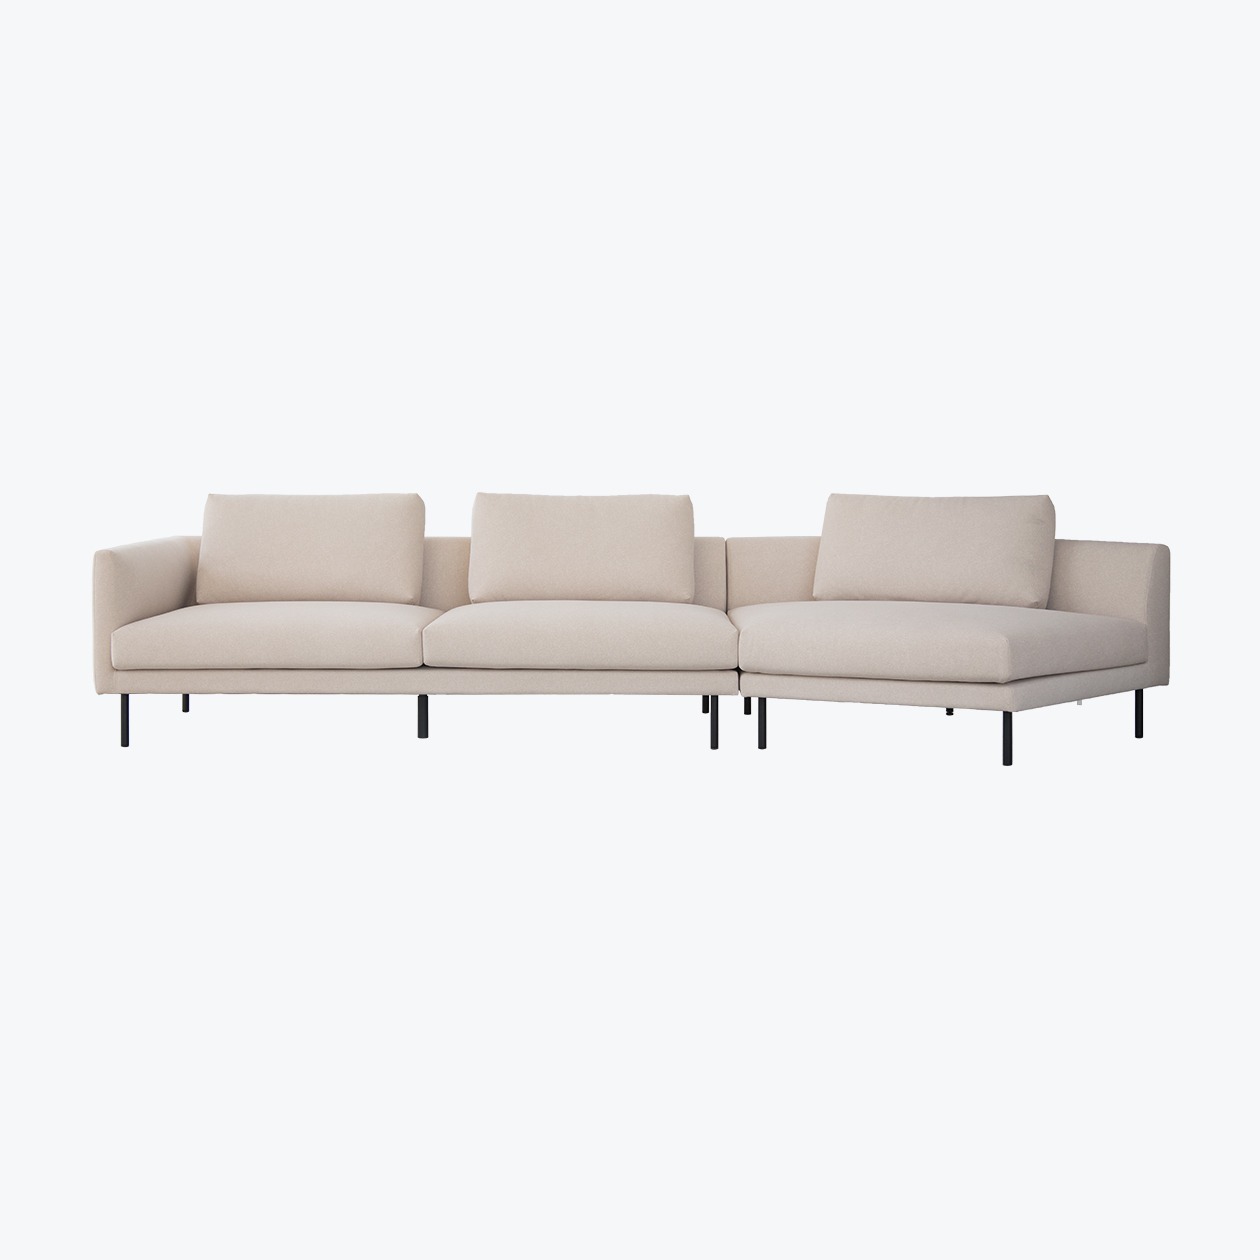 LINEAR SOFA COUCH